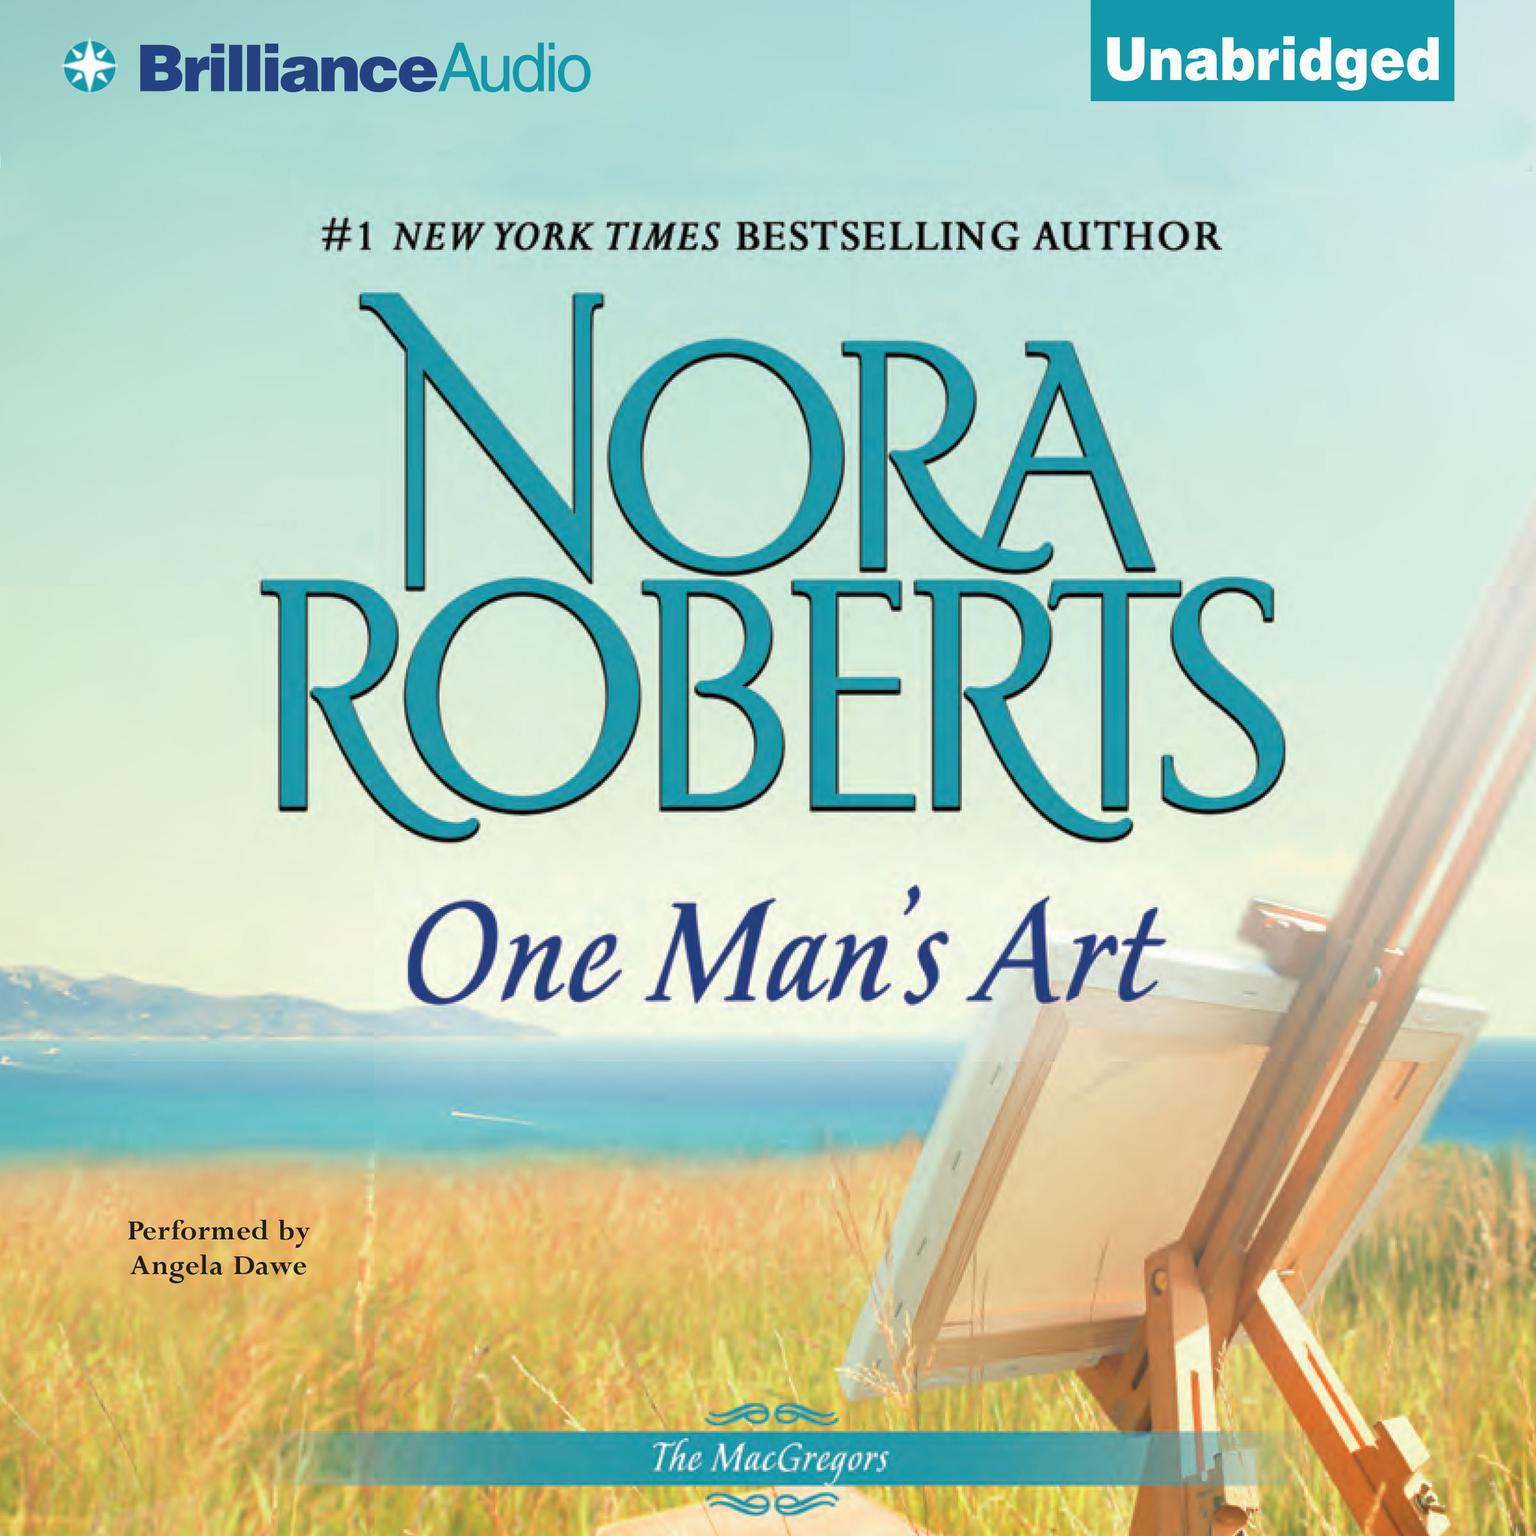 One Mans Art Audiobook, by Nora Roberts